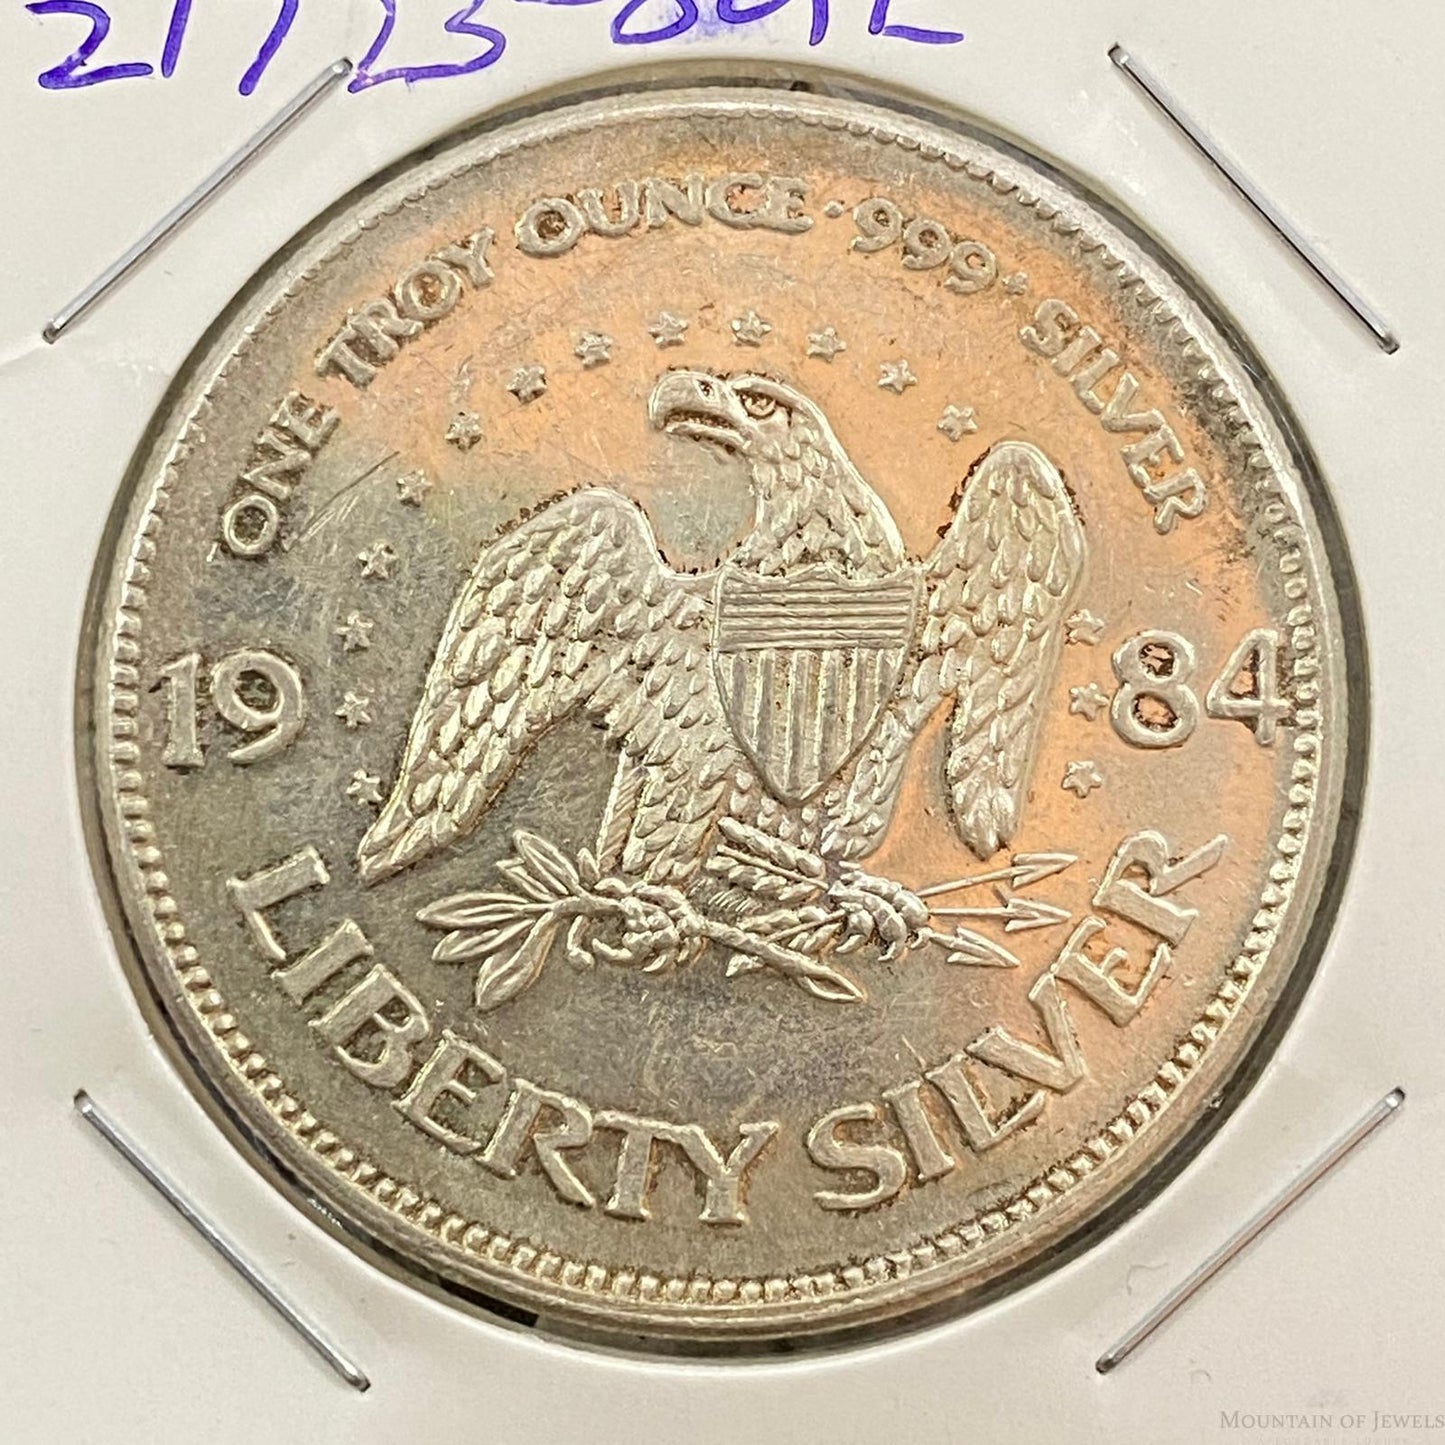 1.0 Troy Ounce .999 Fine Silver US Liberty Silver Coin #21723-8GE